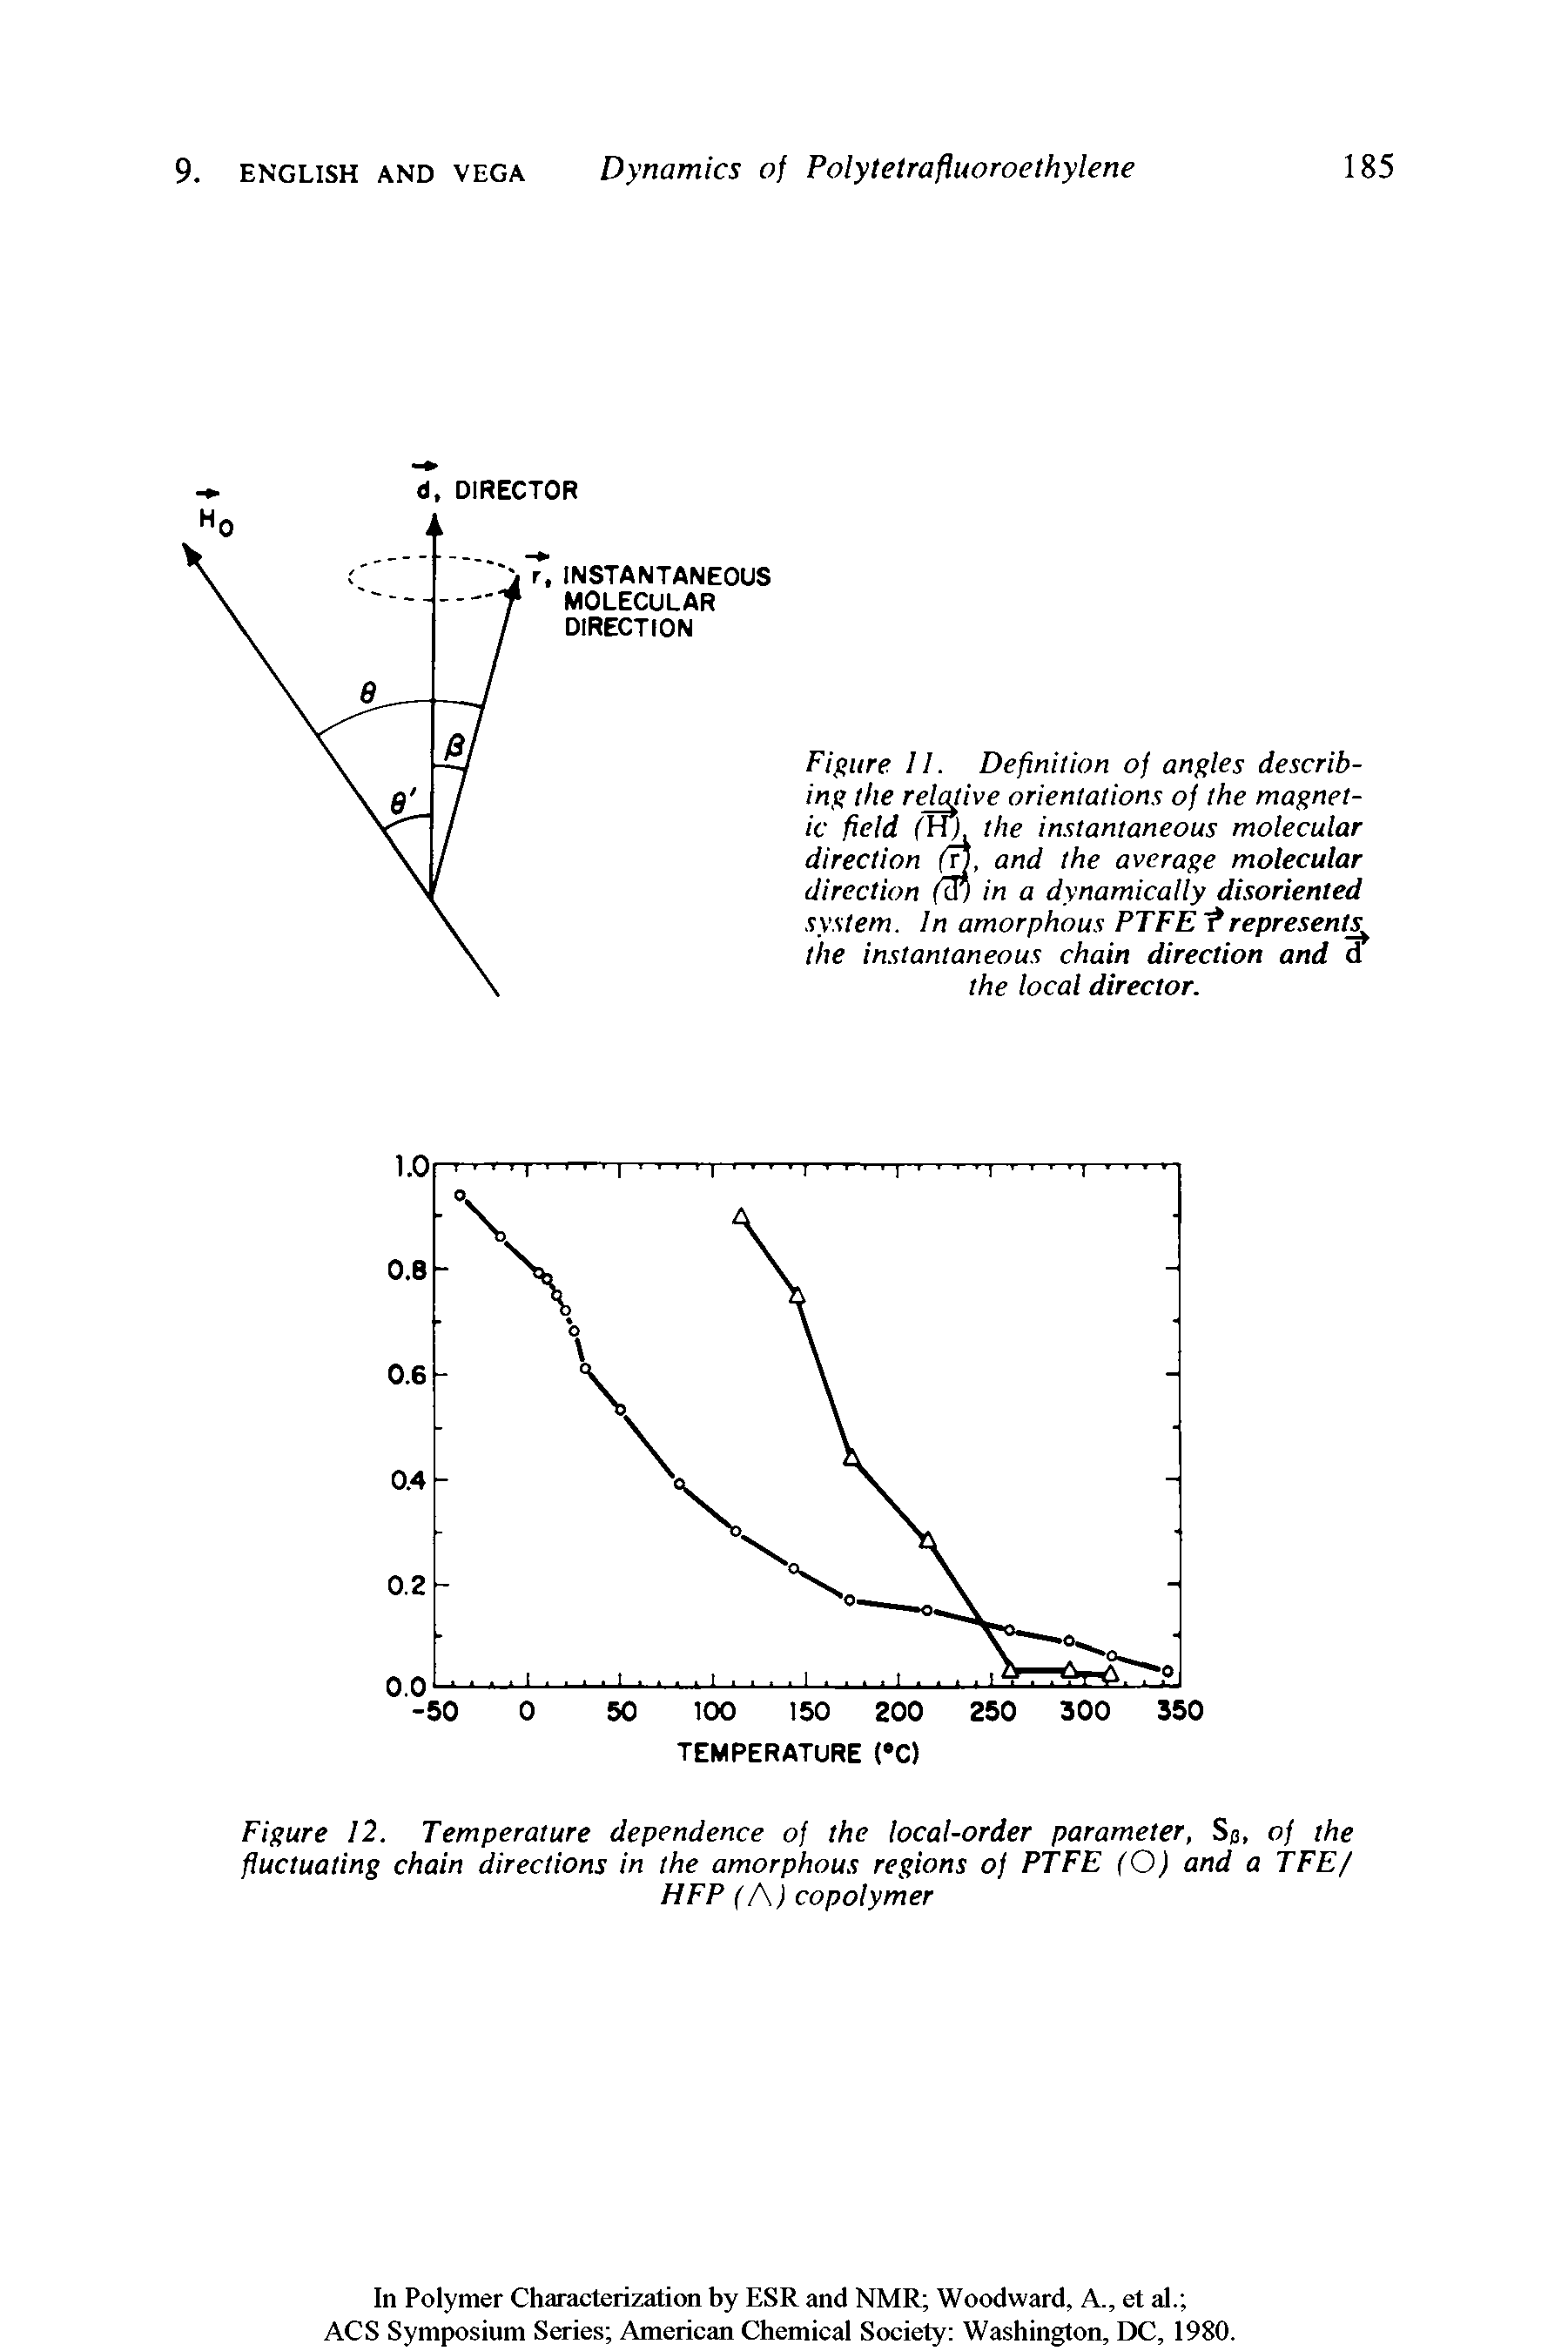 Figure 11. Definition of angles describing the relative orientations of the magnetic field (HI the instantaneous molecular direction m, and the average molecular direction (a) in a dynamically disoriented system. In amorphous PTFE represents the instantaneous chain direction and d the local director.